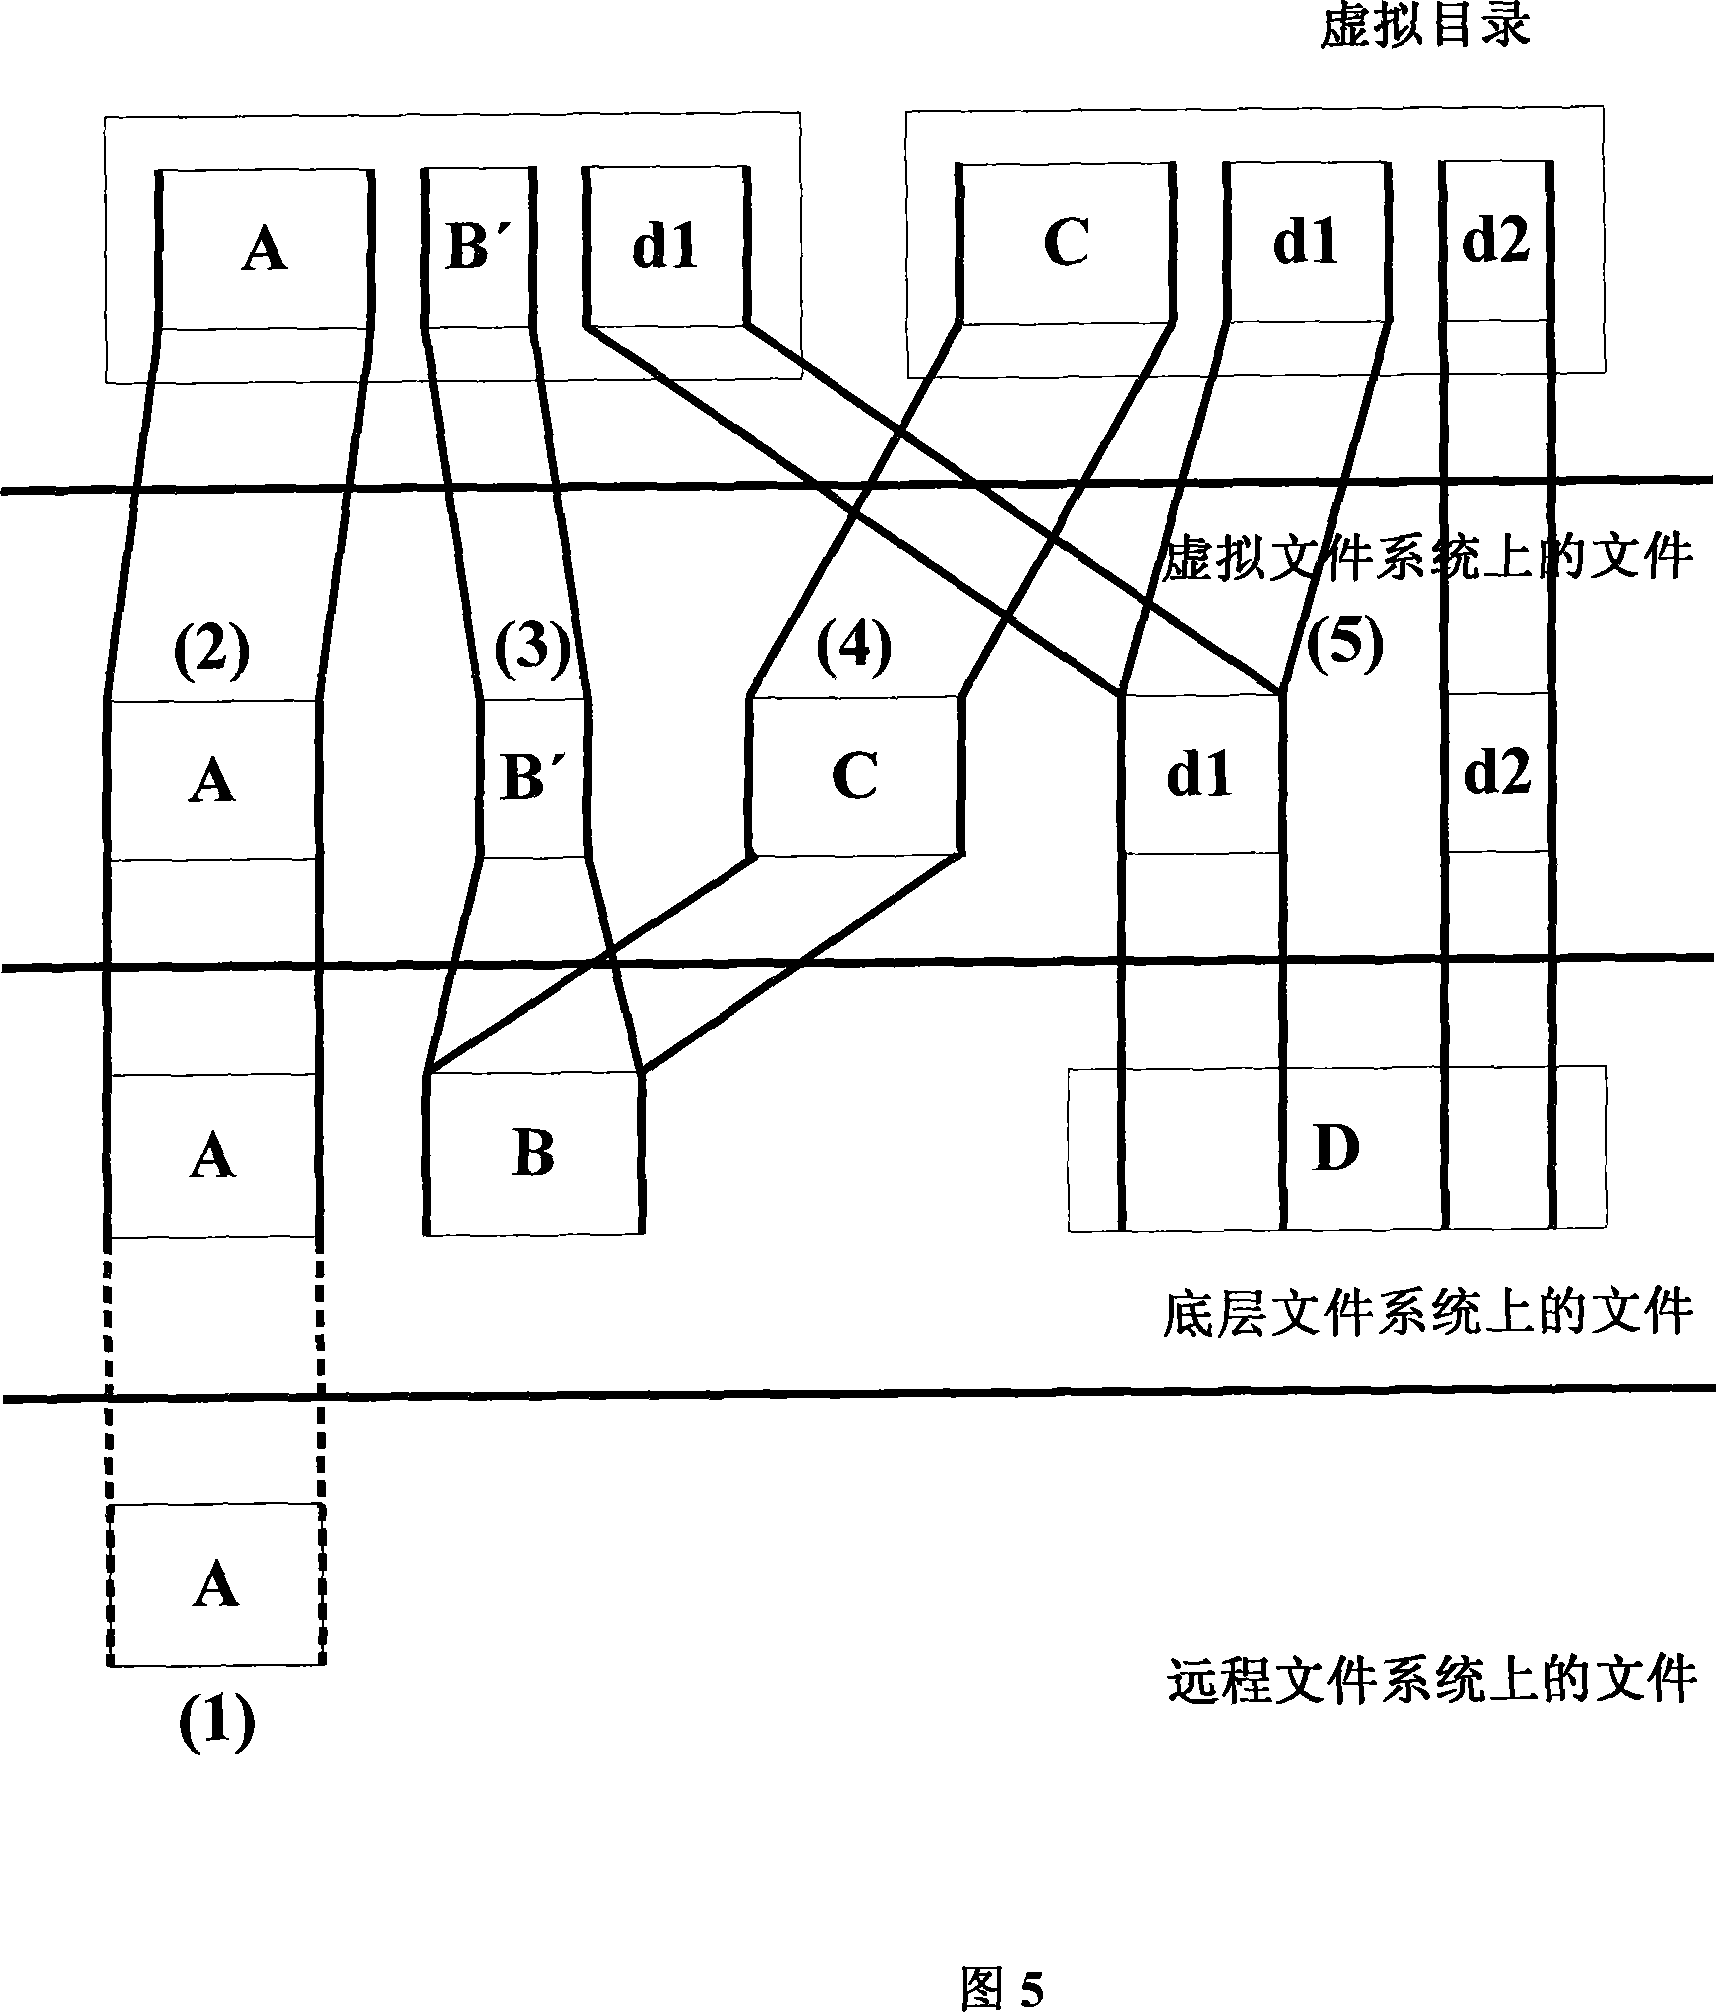 File services method based on ContextFS context file systems